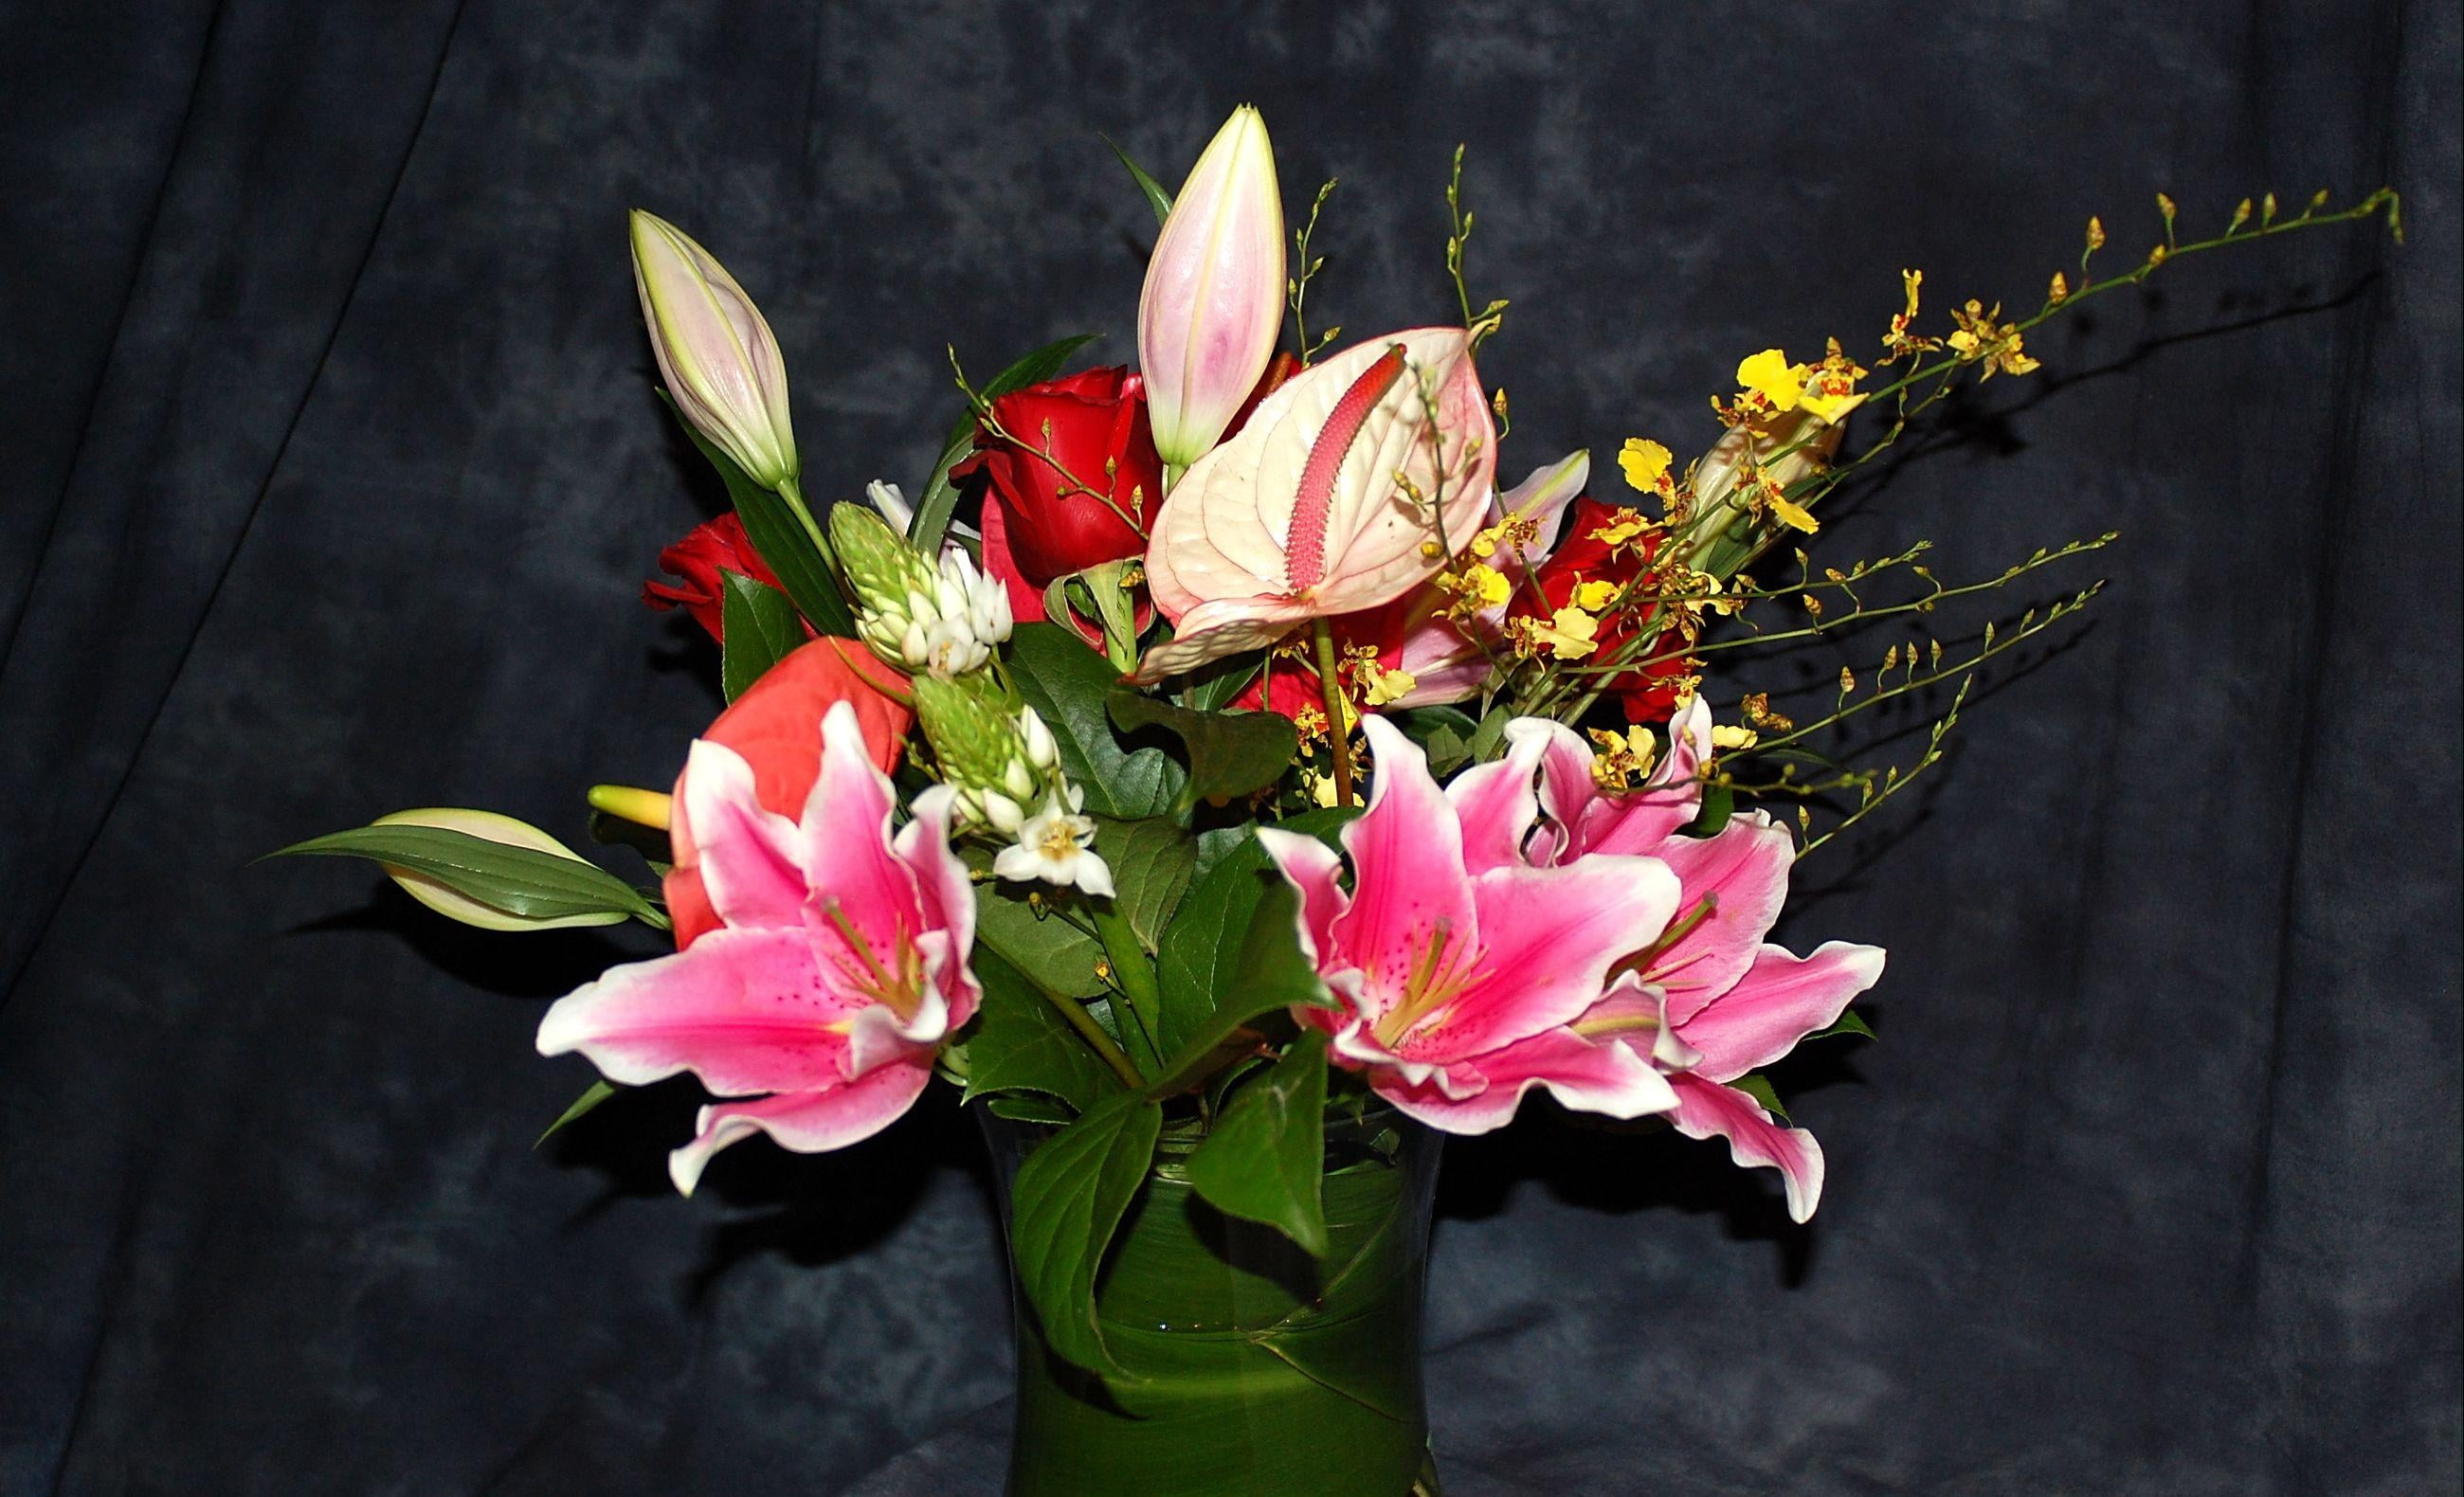 arranged pink and green petaled flowers